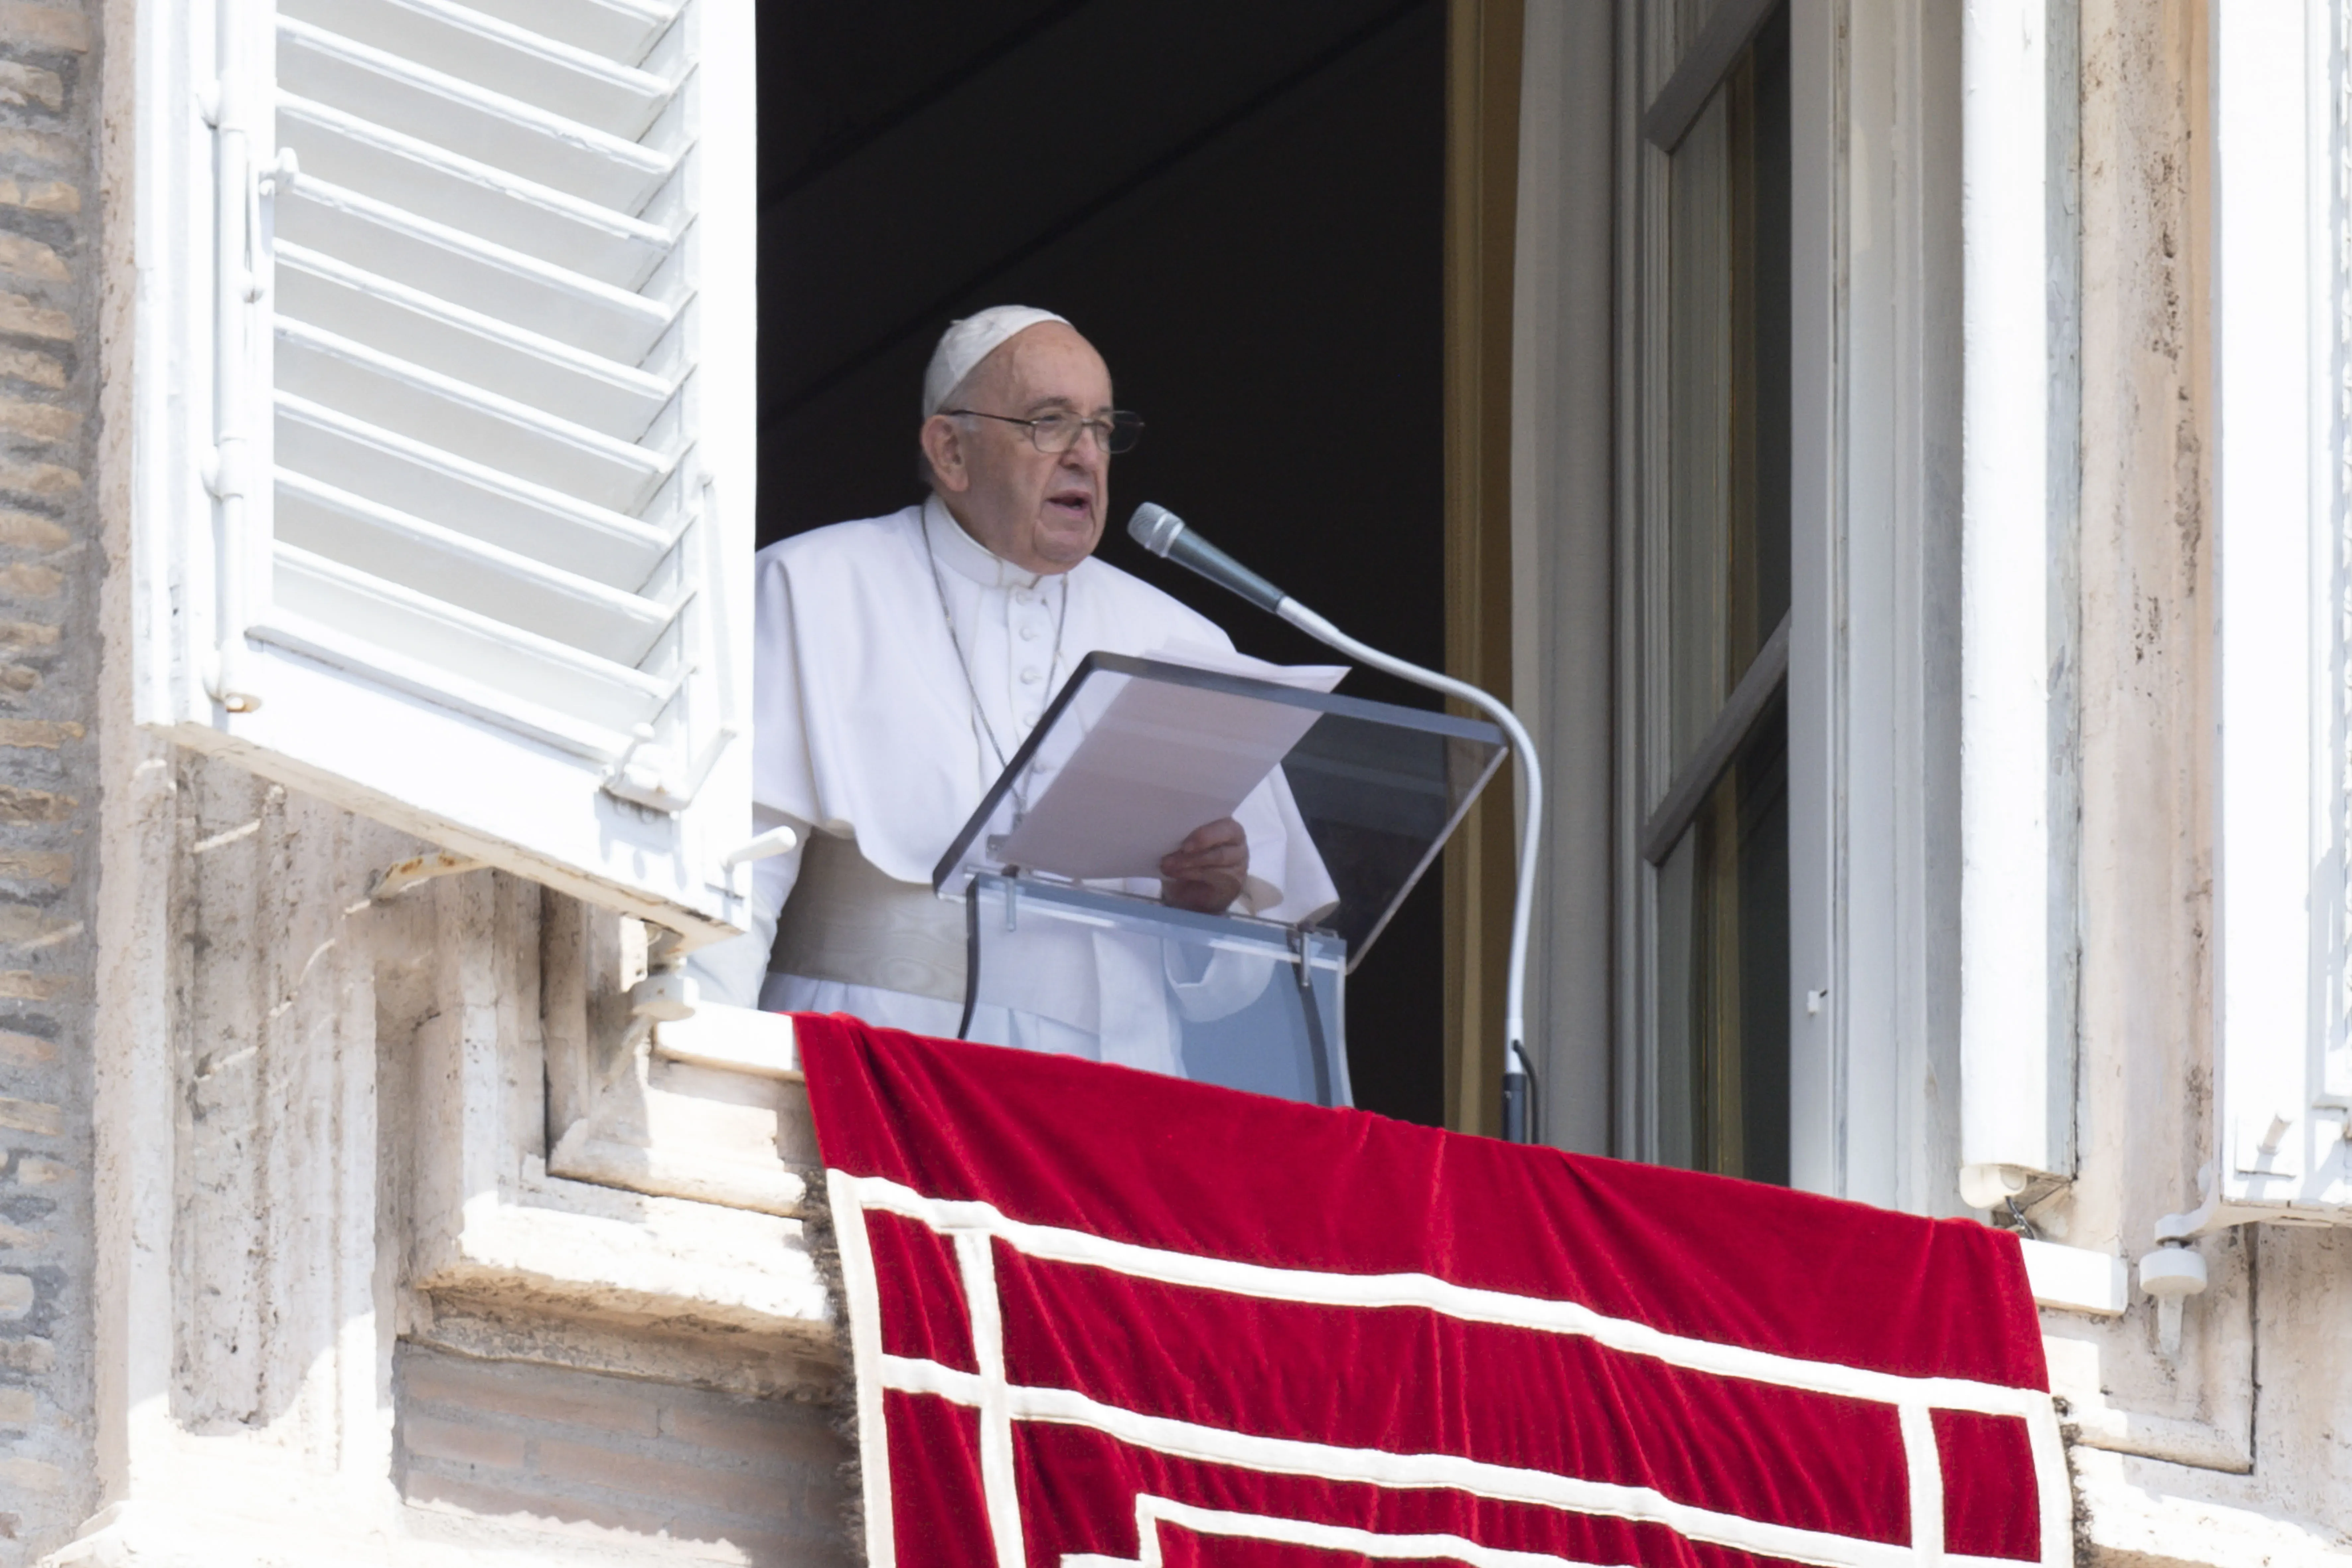 Pope Francis on Assumption Day: "Do I believe to love is to reign, and to serve is power?"